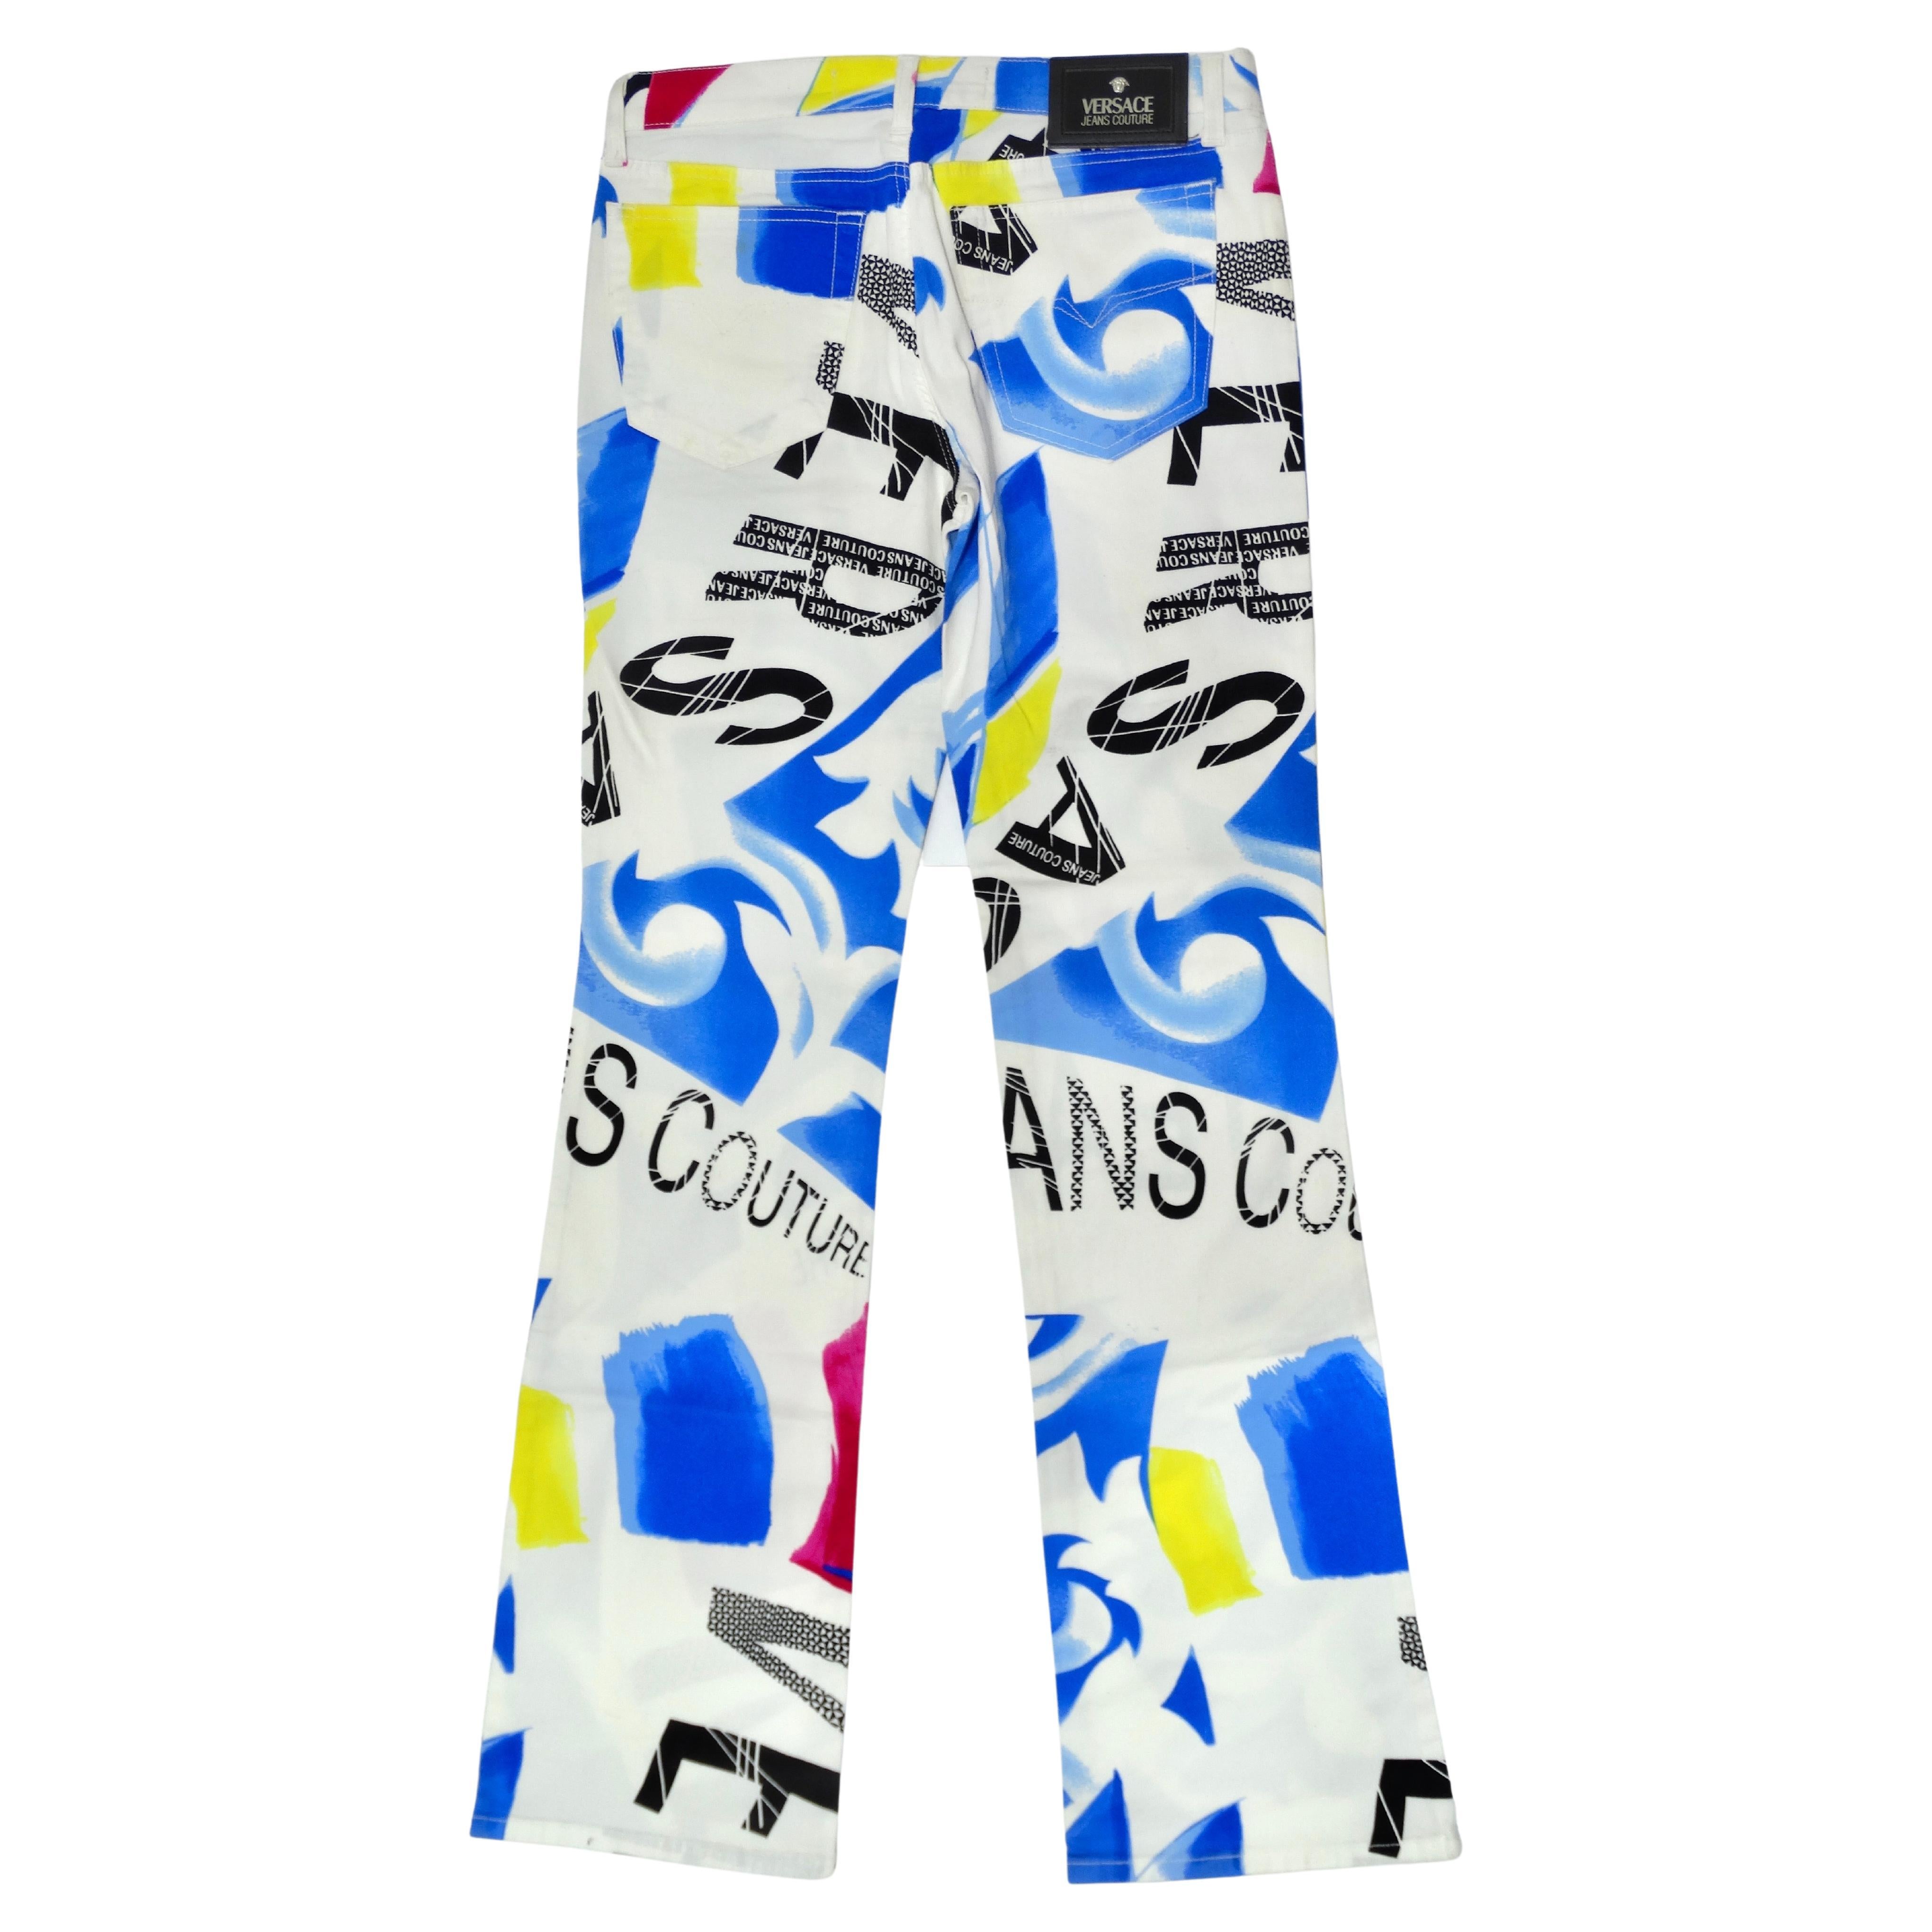 When the jeans ARE the outfit! These are such a fun and vibrant vintage 2000's pair of Versace Jeans Couture. These jeans feature a button closure, flared leg, bold pattern in blue, yellow, and pink, and a mix of large and small lettering of